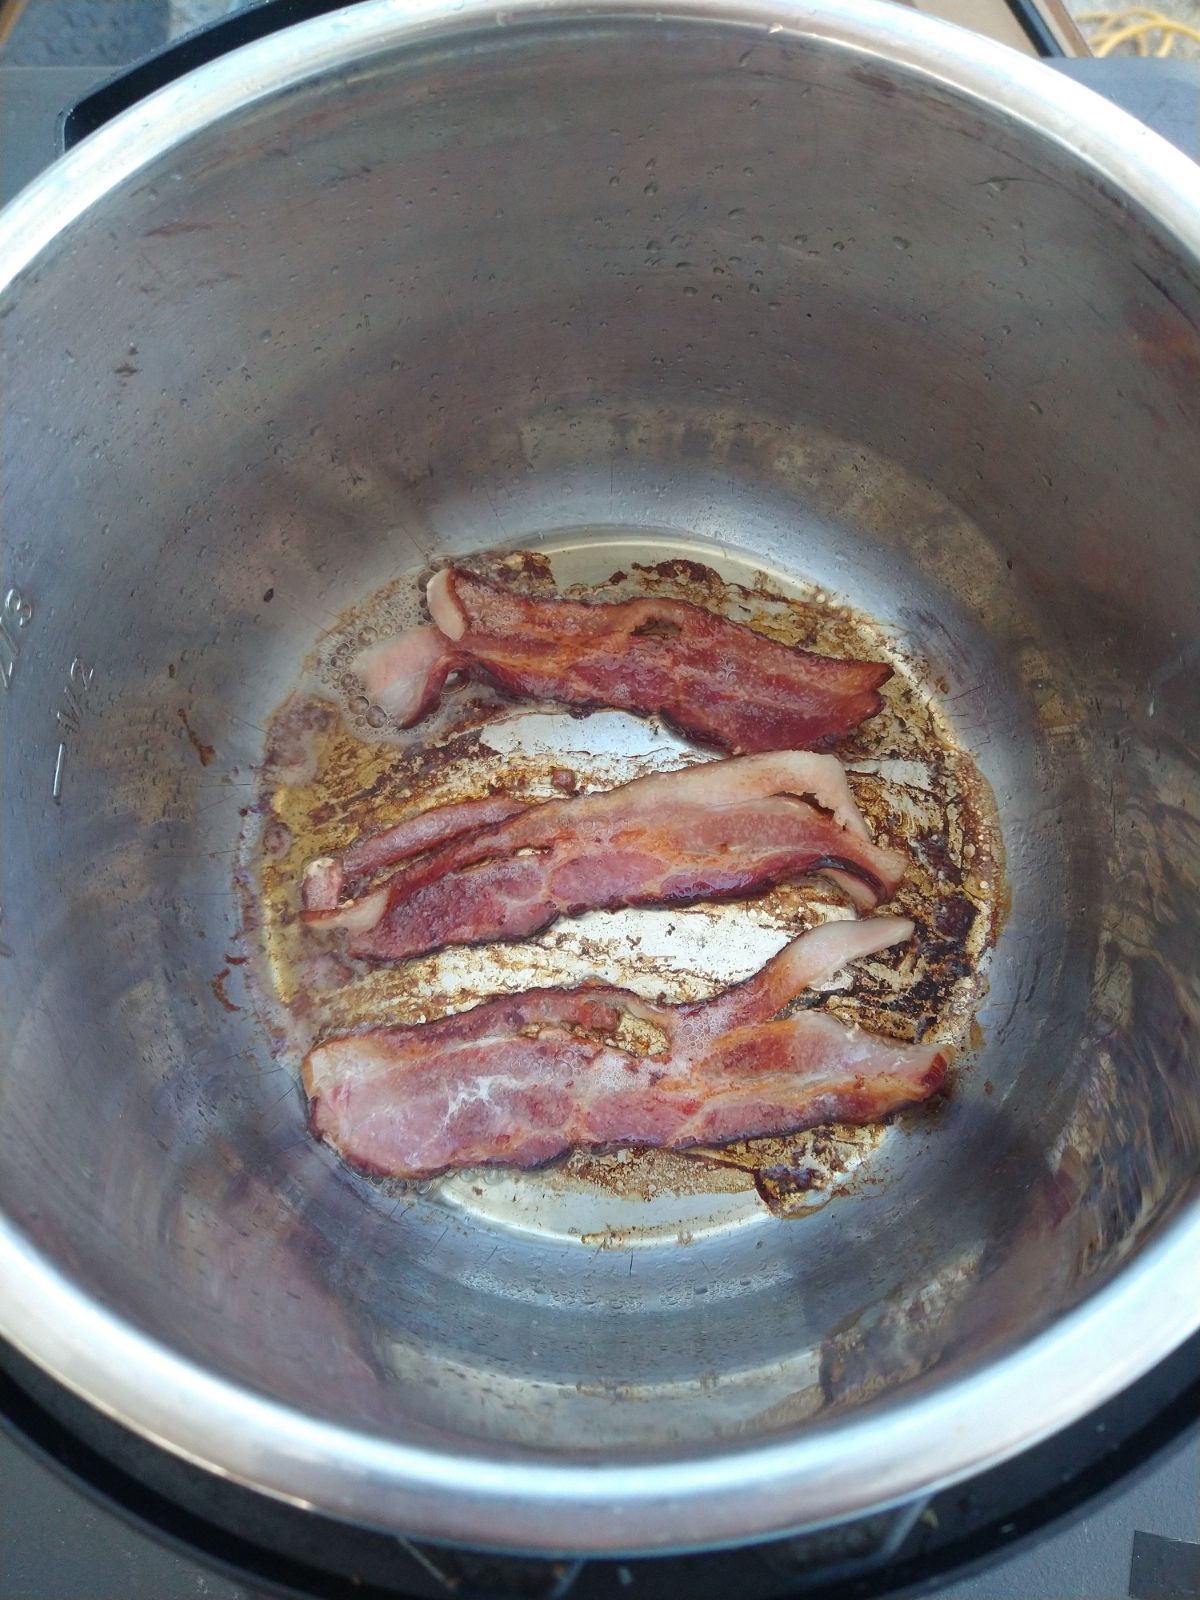 Cooked bacon in the bottom of the Instant Pot.